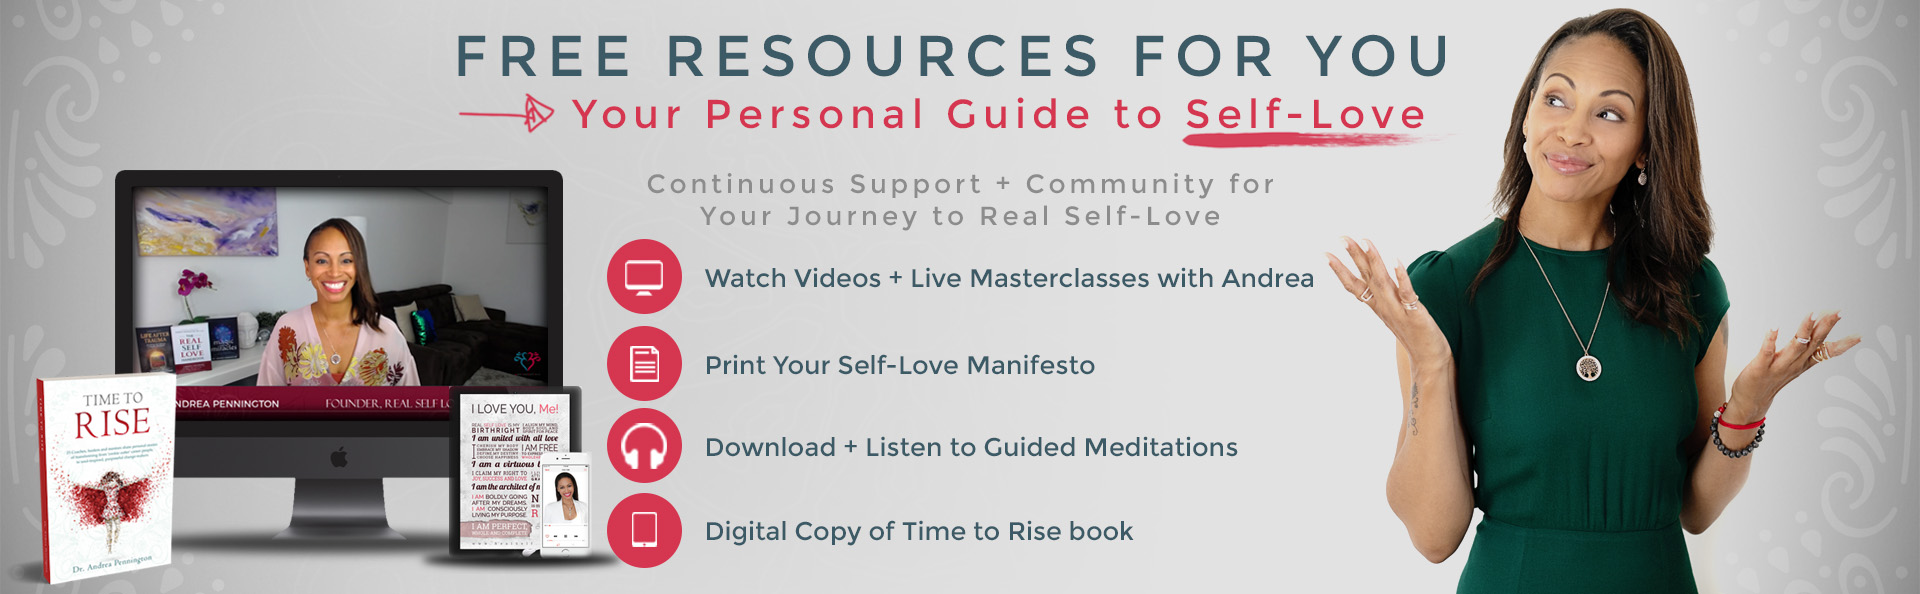 free resources for you